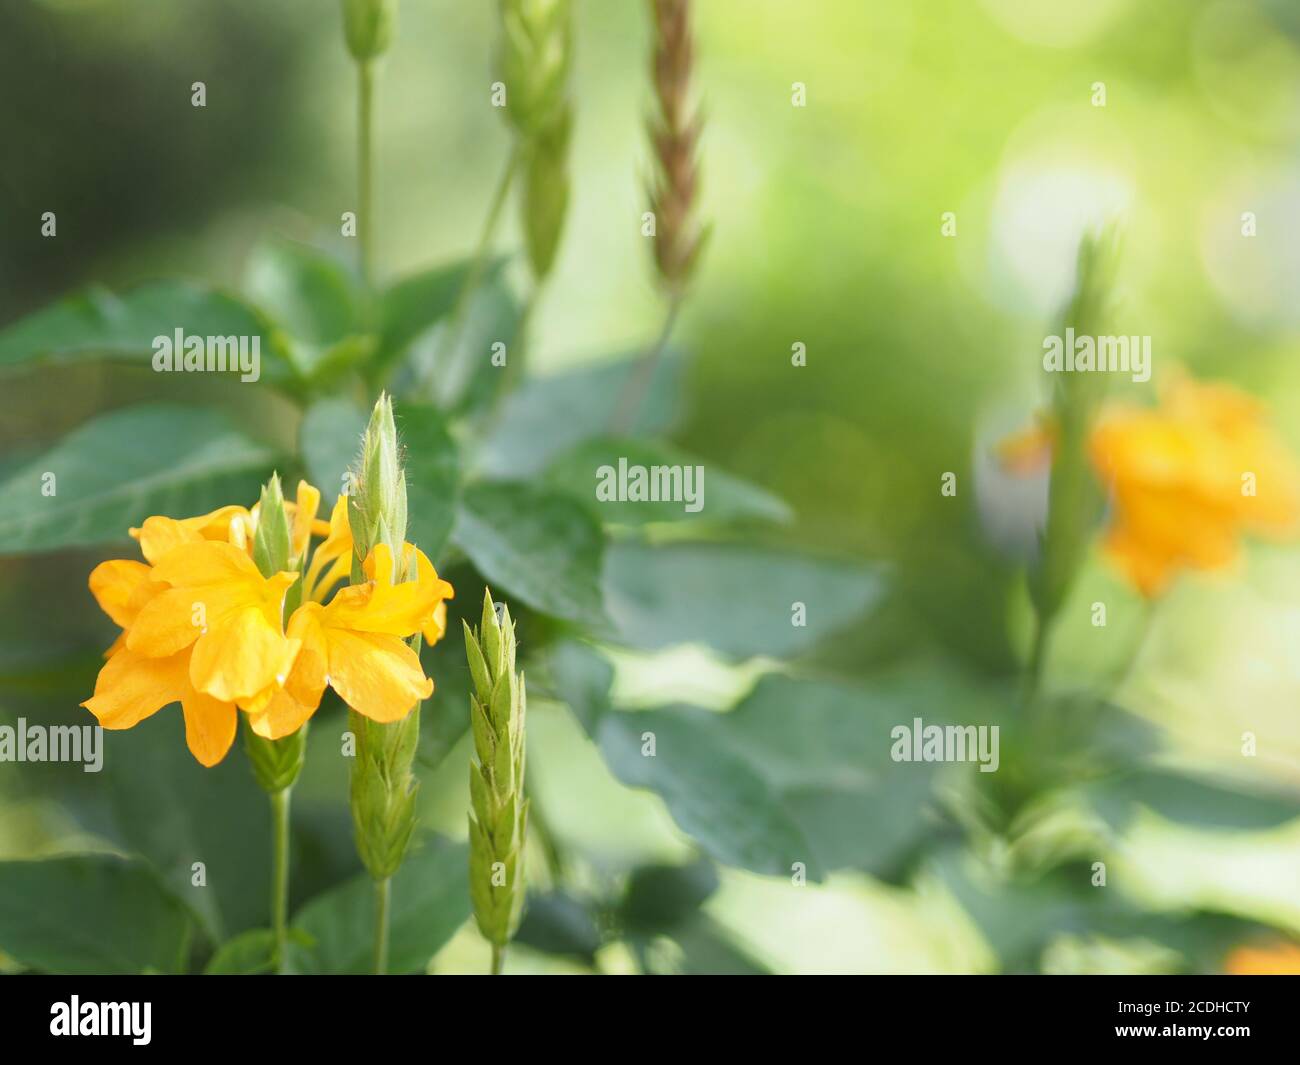 Yellow flower Aphelandra crossandra, Acanthaceae family blooming in garden on blurred nature background Stock Photo